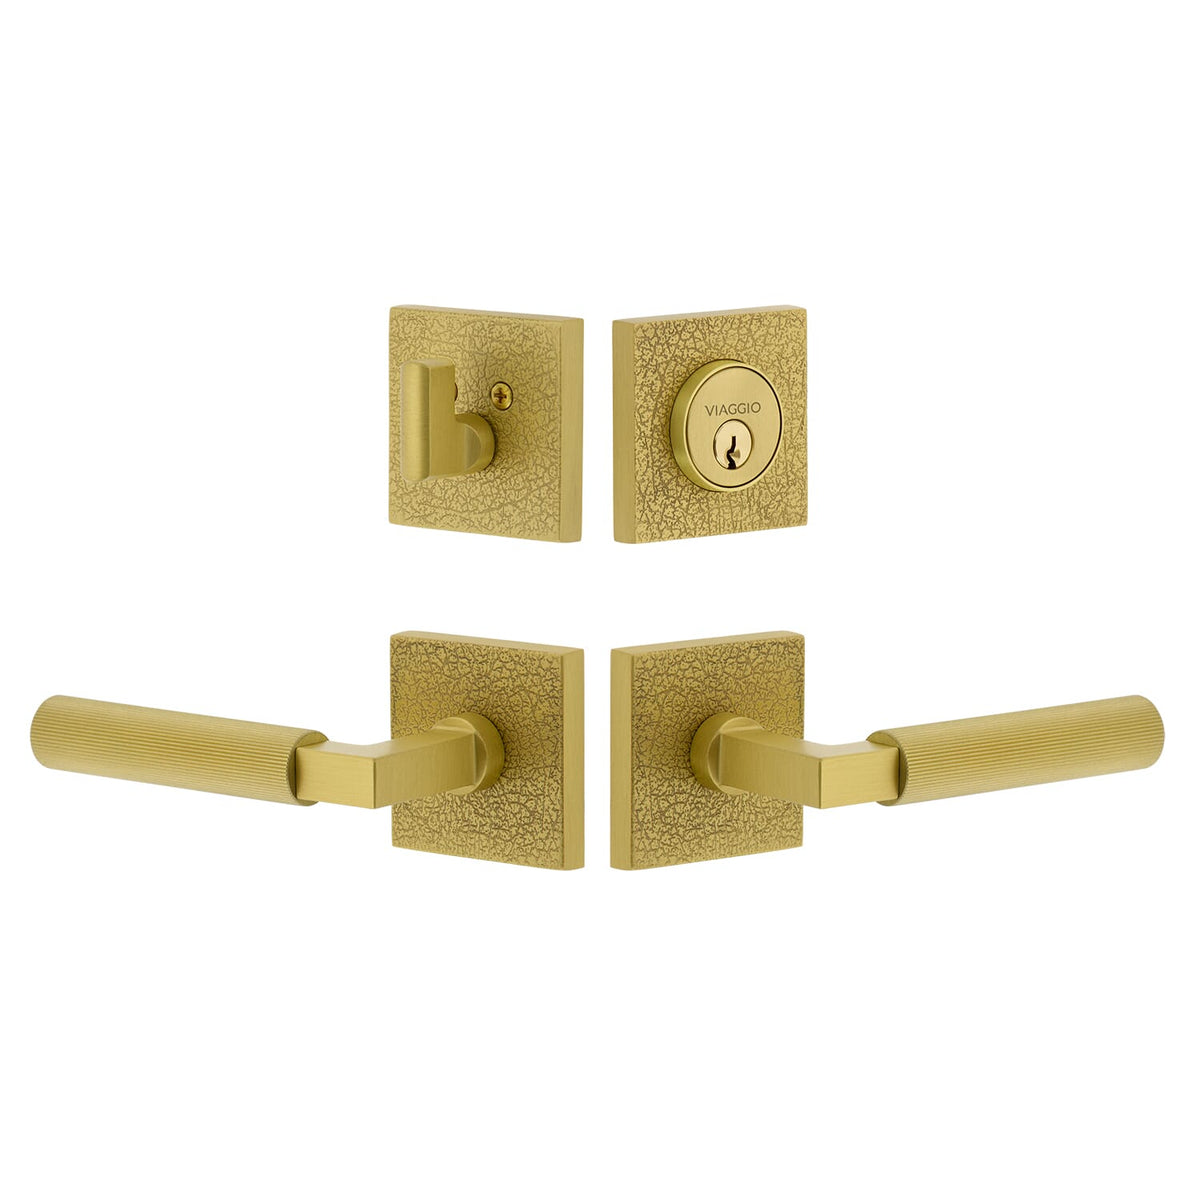 Quadrato Leather Rosette Entry Set with Contempo Fluted Lever  in Satin Brass